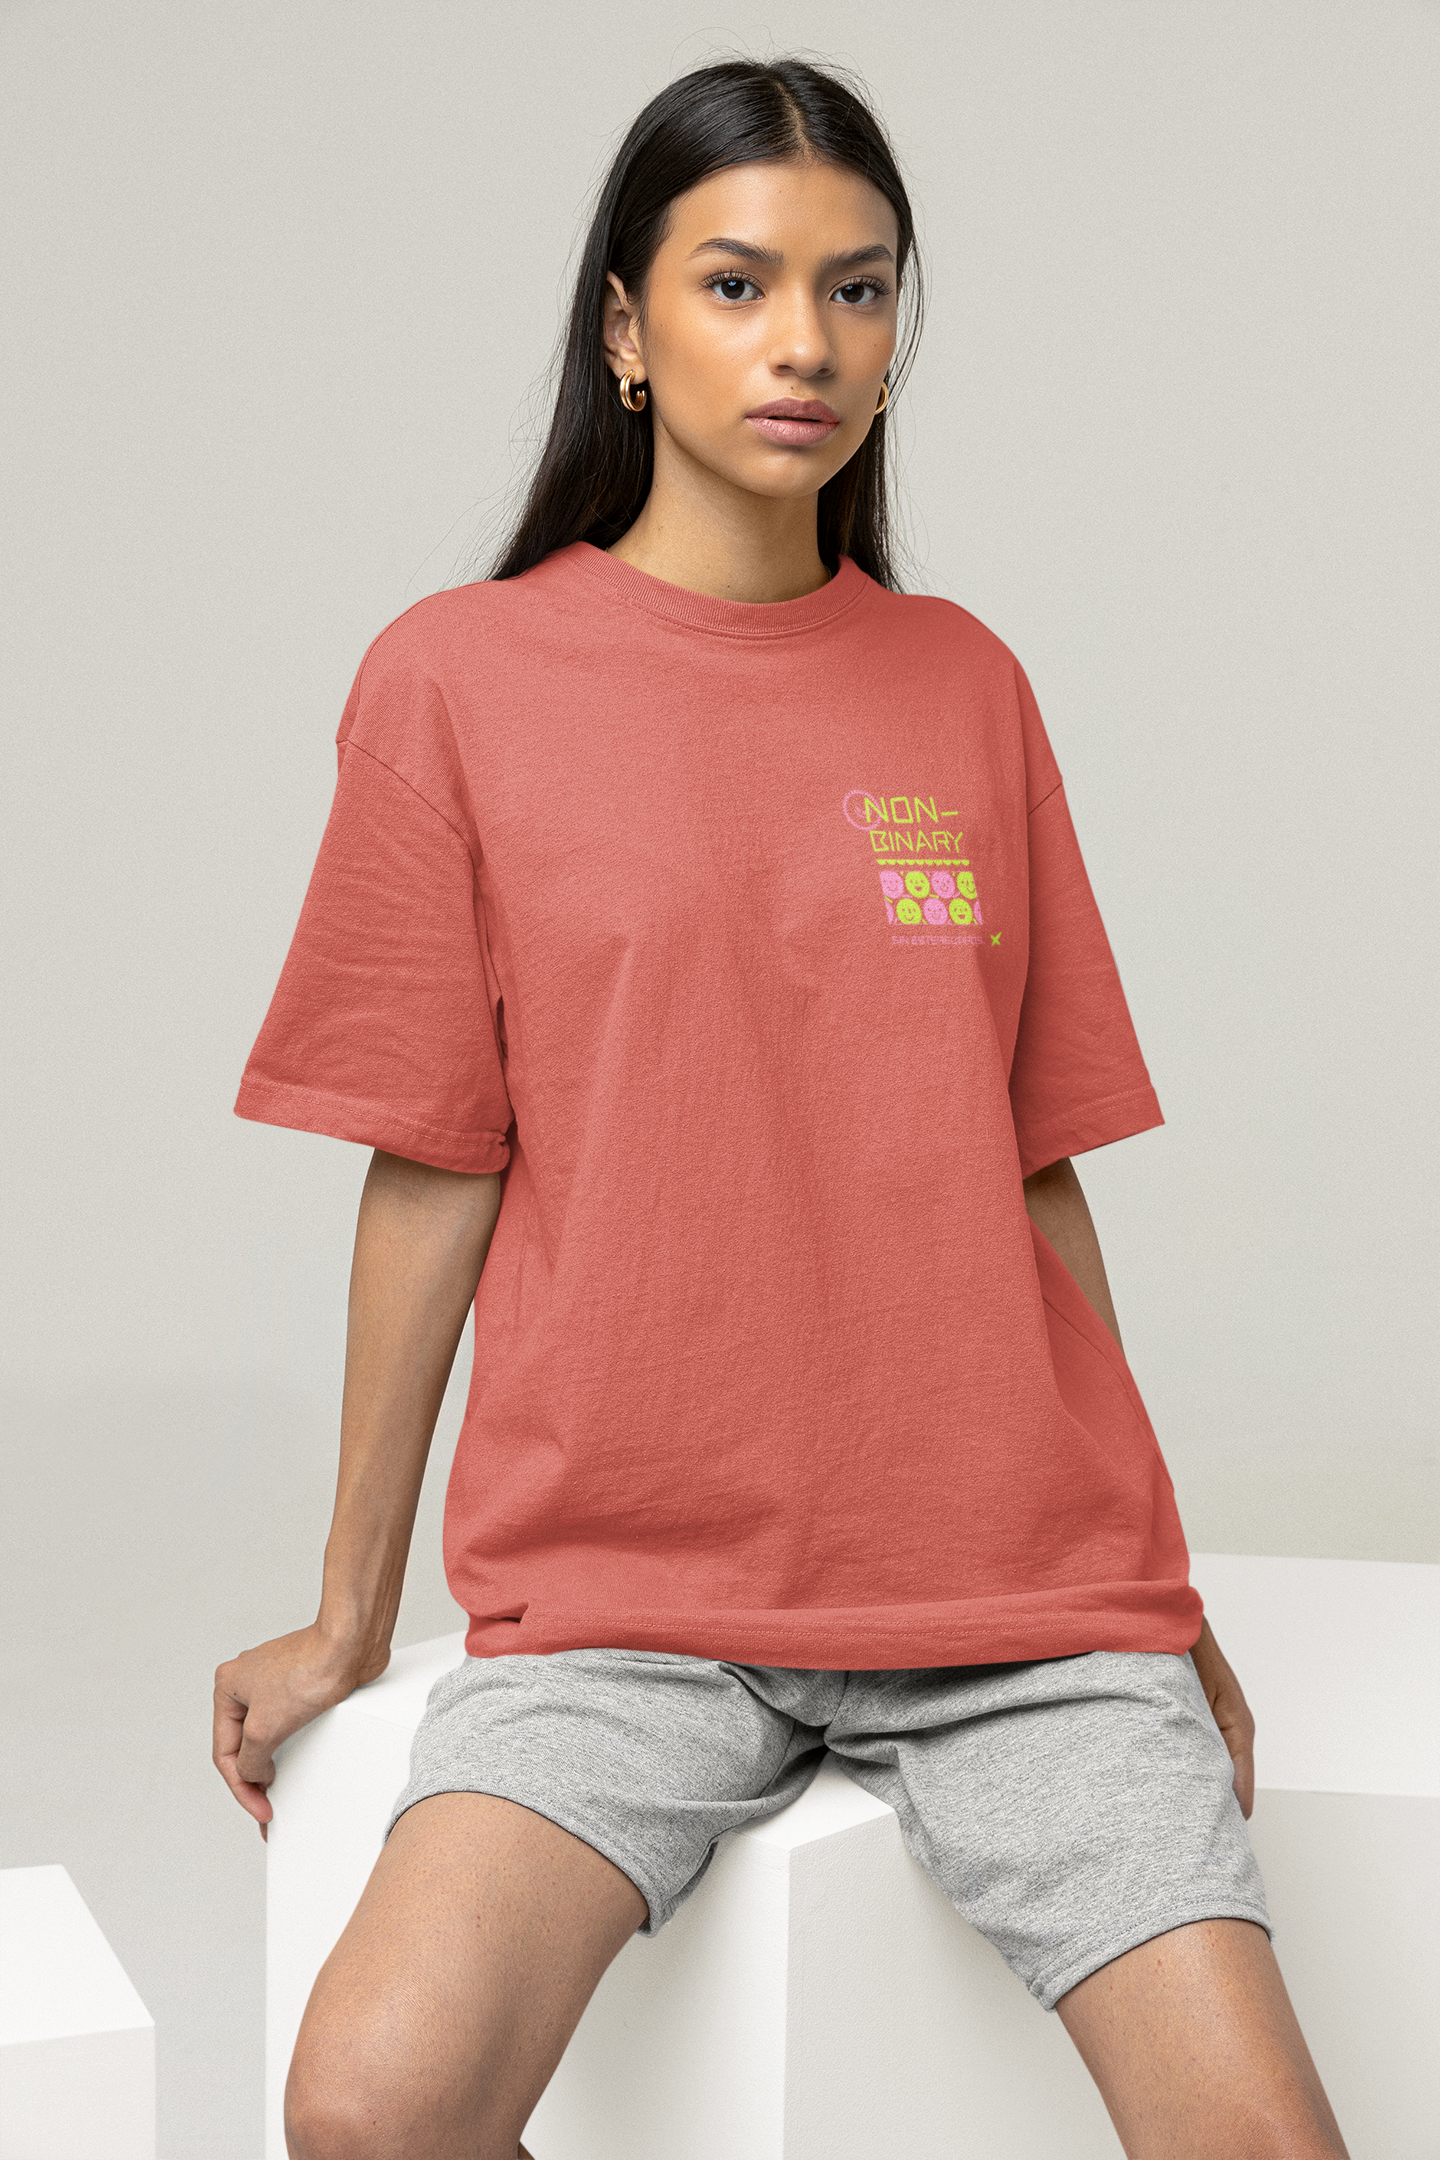 OVERSIZED TSHIRTS CORAL: NON BINARY